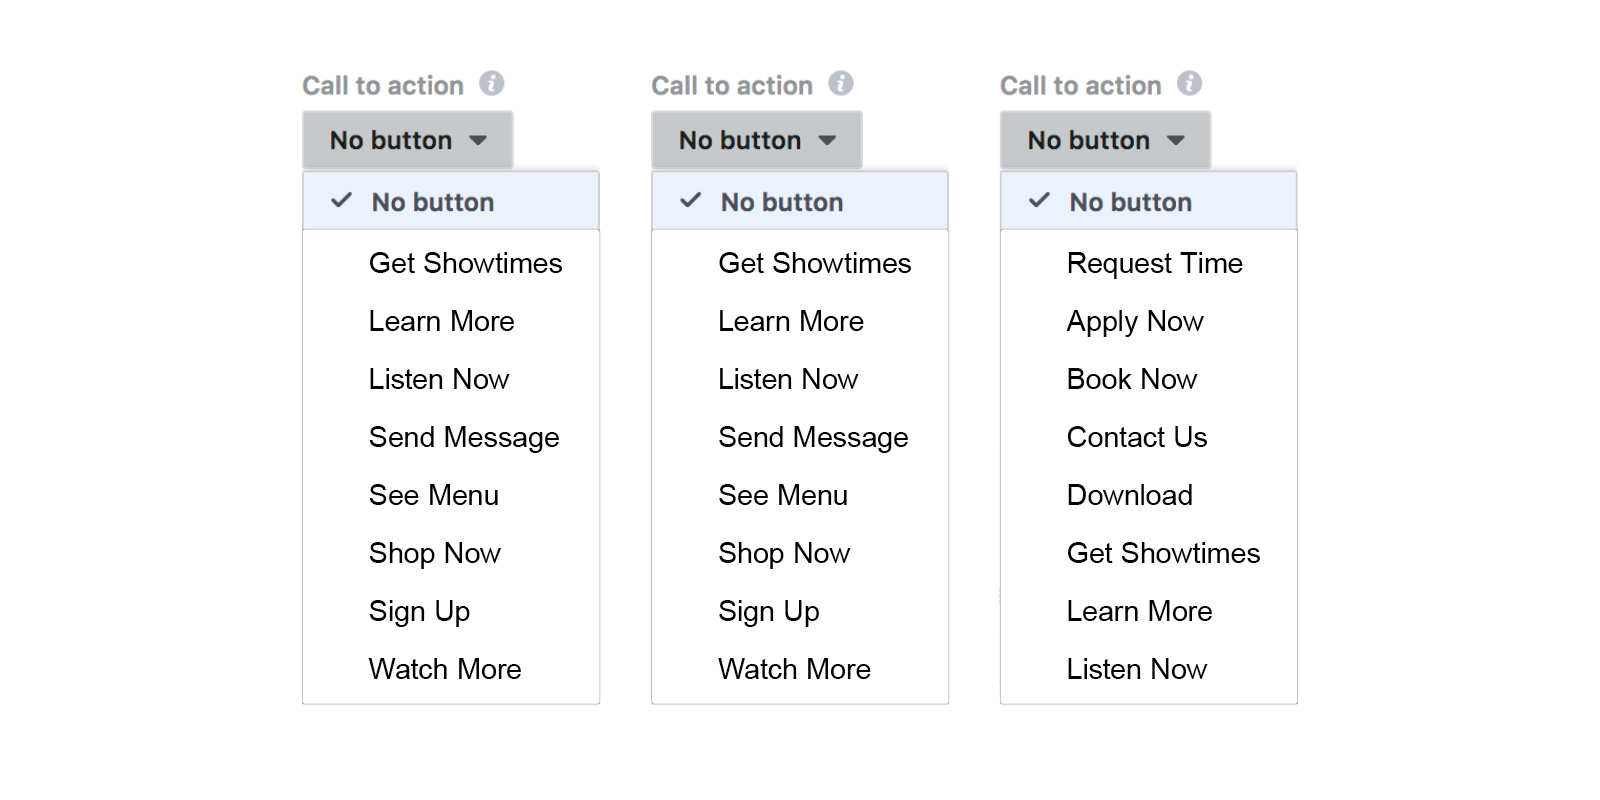 Three call to action menus showing the different options you can select in Facebook. Two of them have the same menu options: no button, get showtimes, learn more, listen now, send message, see menu, shop now, sign up, watch more. The third menu has the following options: no button, request time, apply now, book now, contact us, download, get showtimes, learn more, listen now.